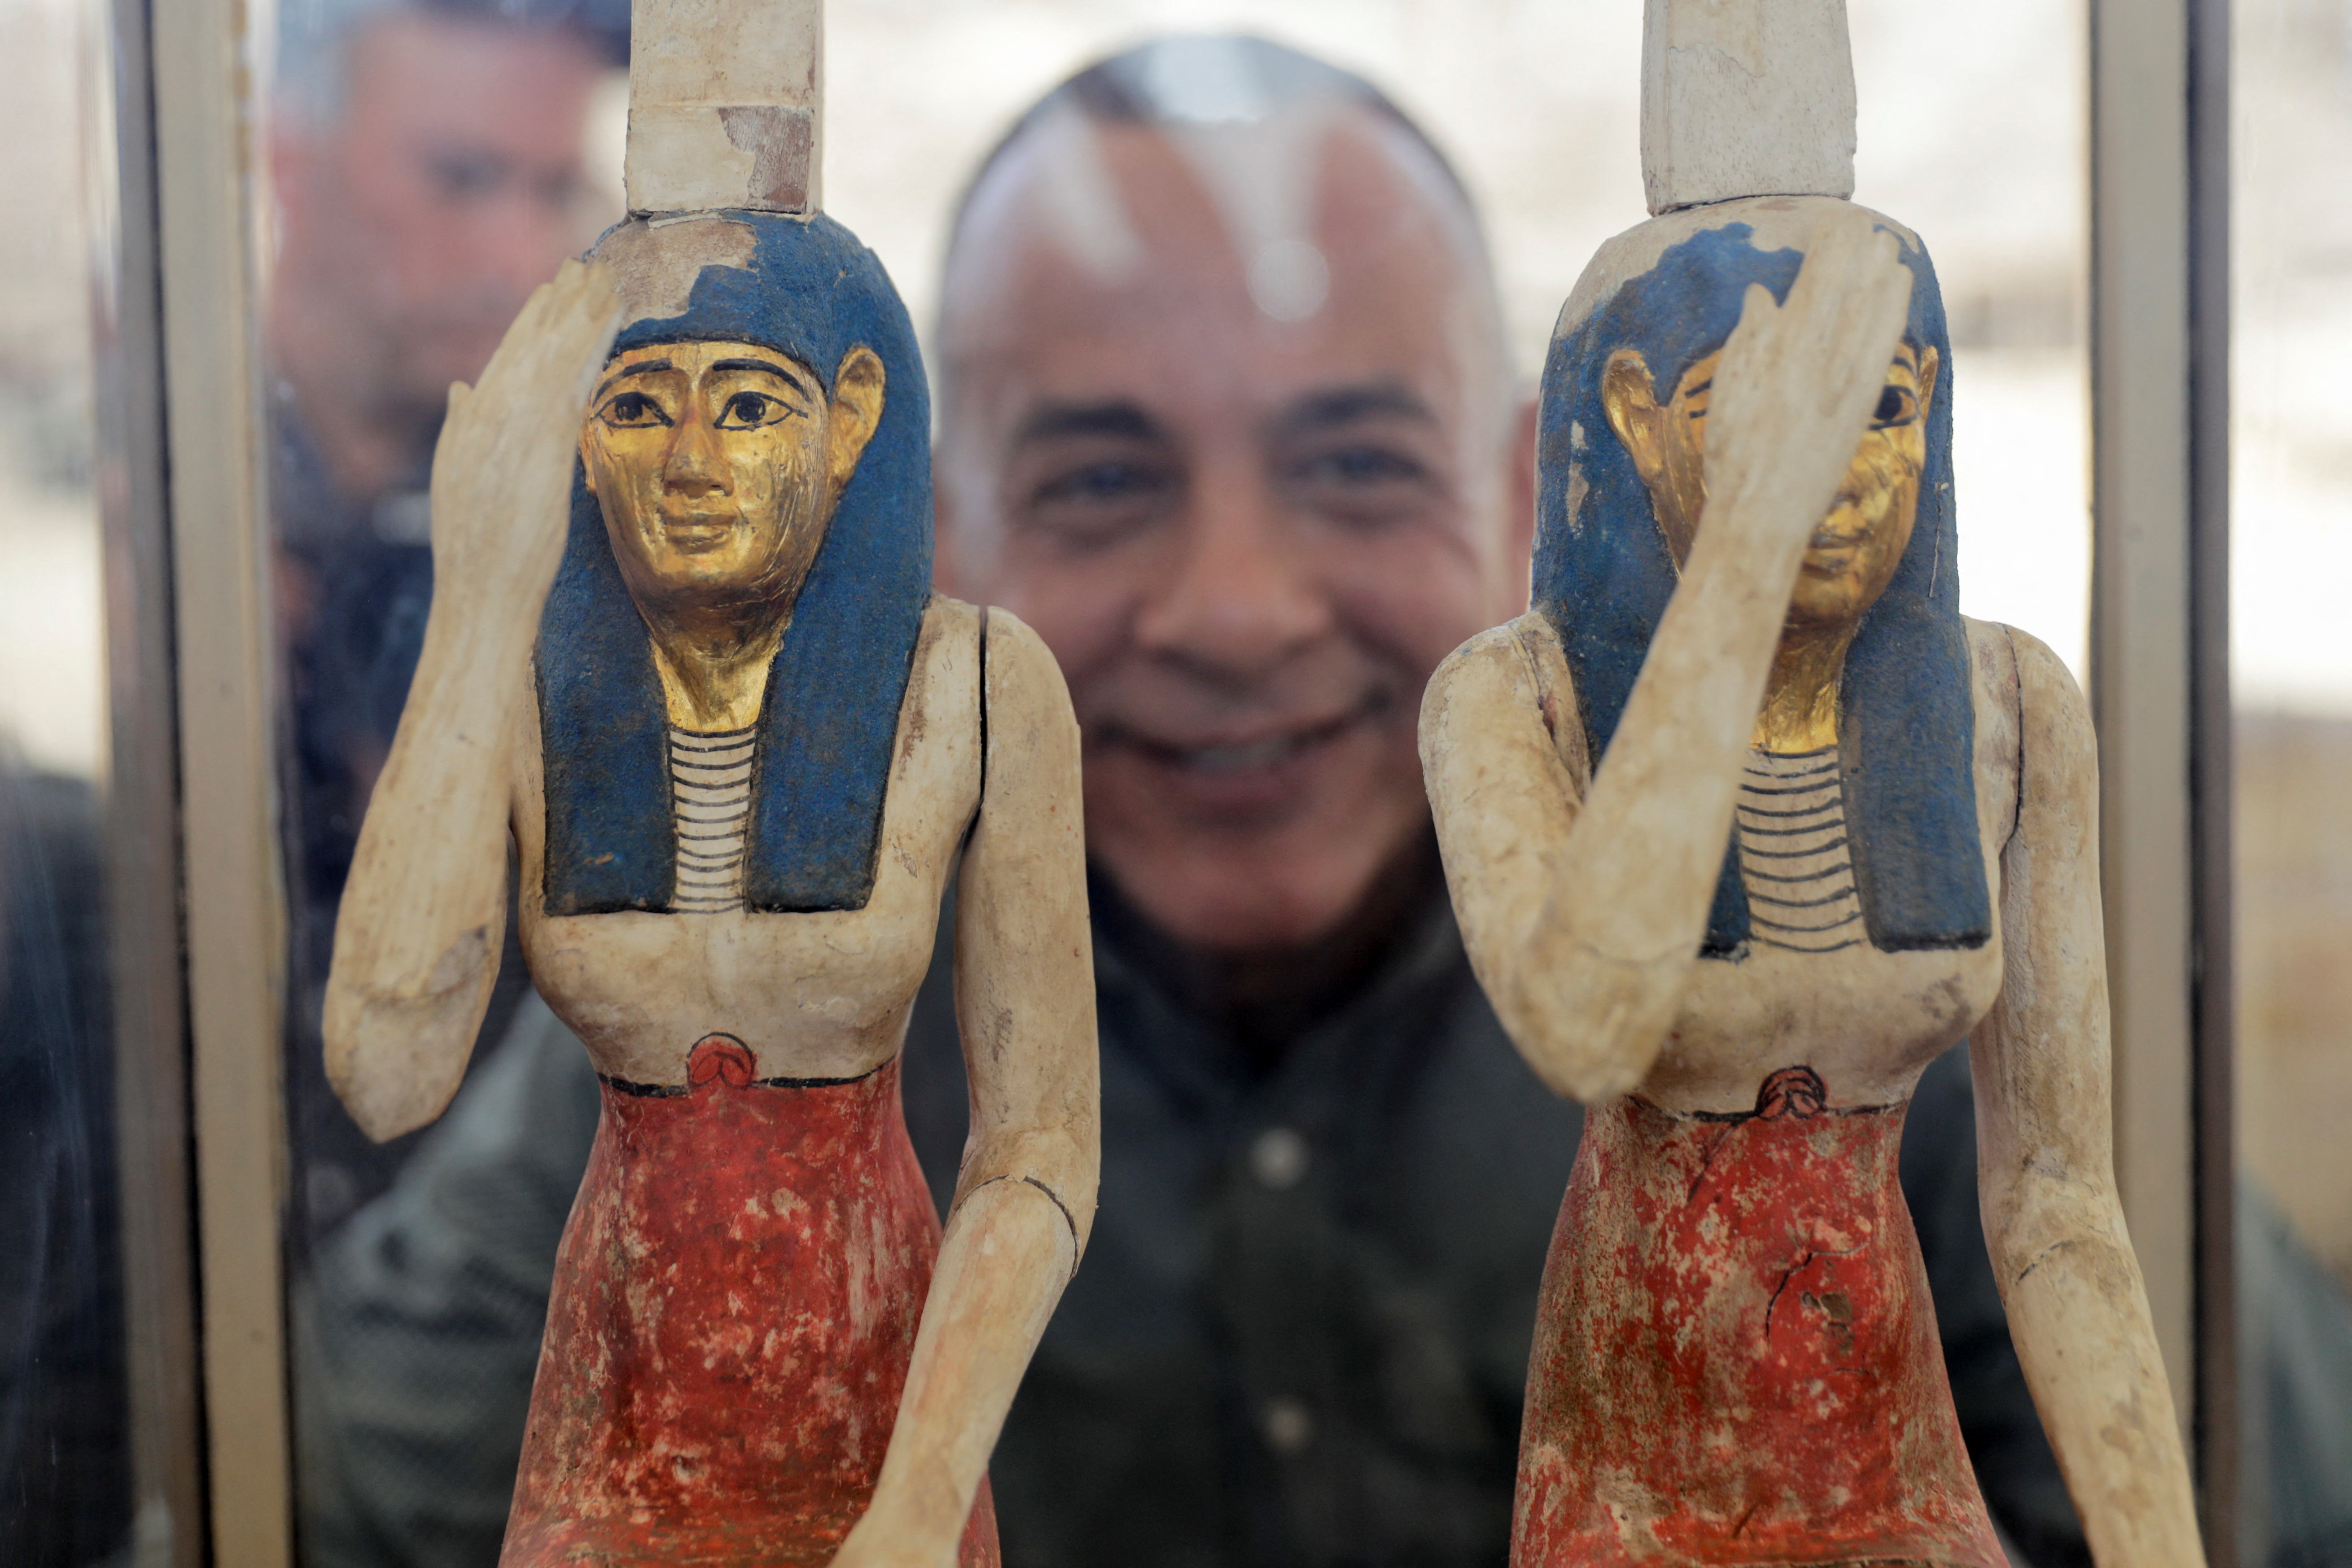 Figurines from the newly discovered burial site displayed during a presentation in Giza